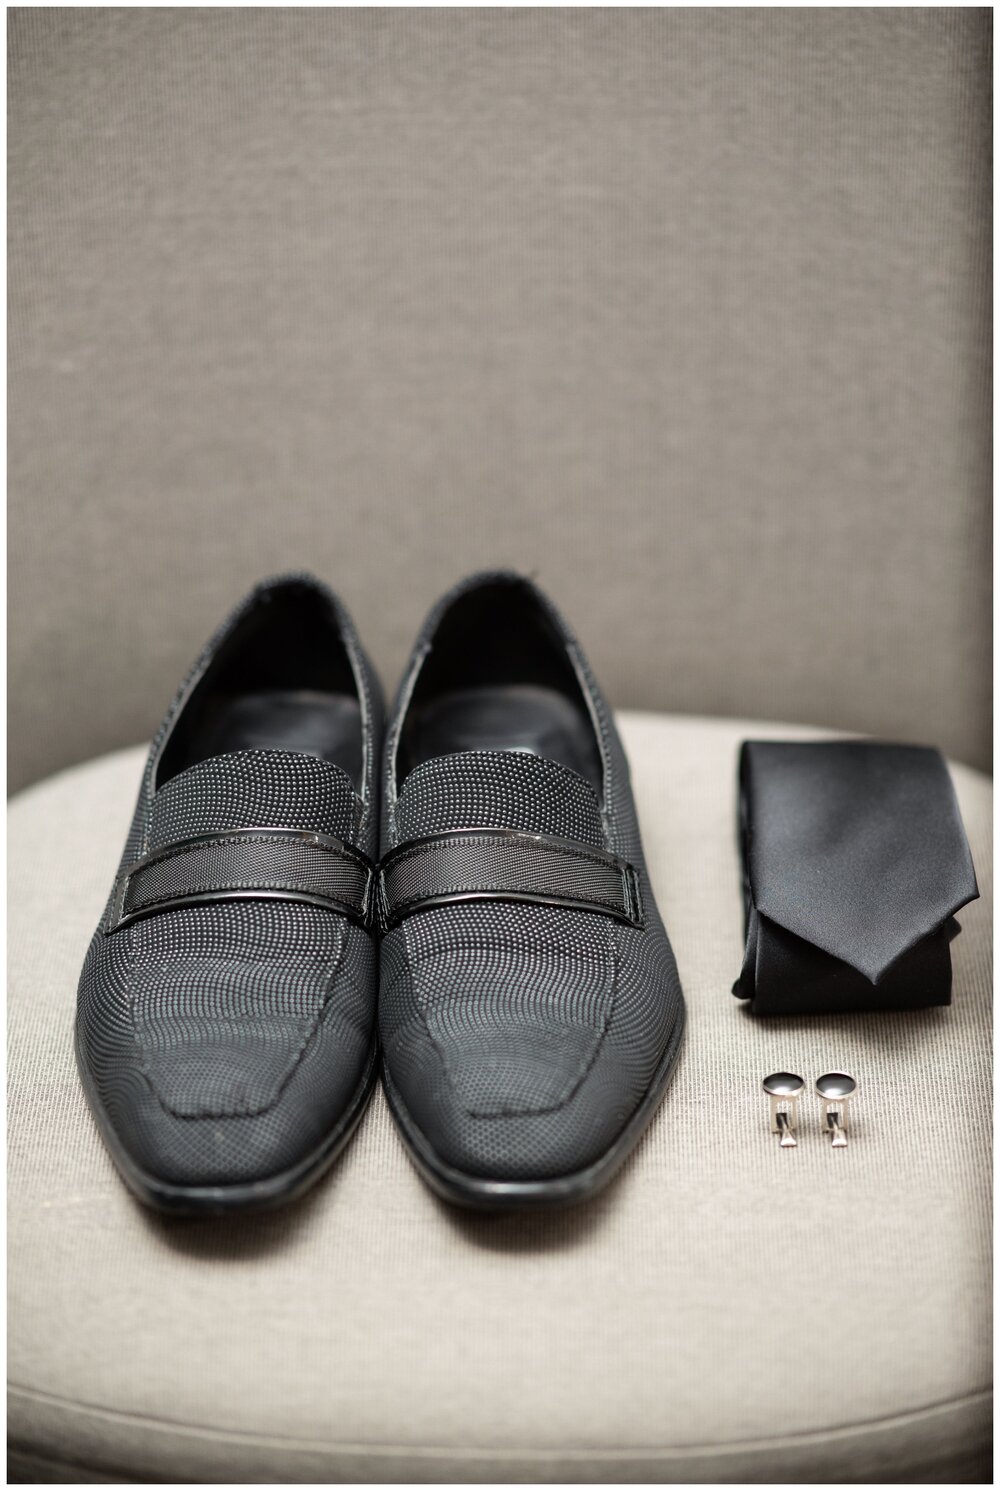 black shoes and tie groom detail flatlay